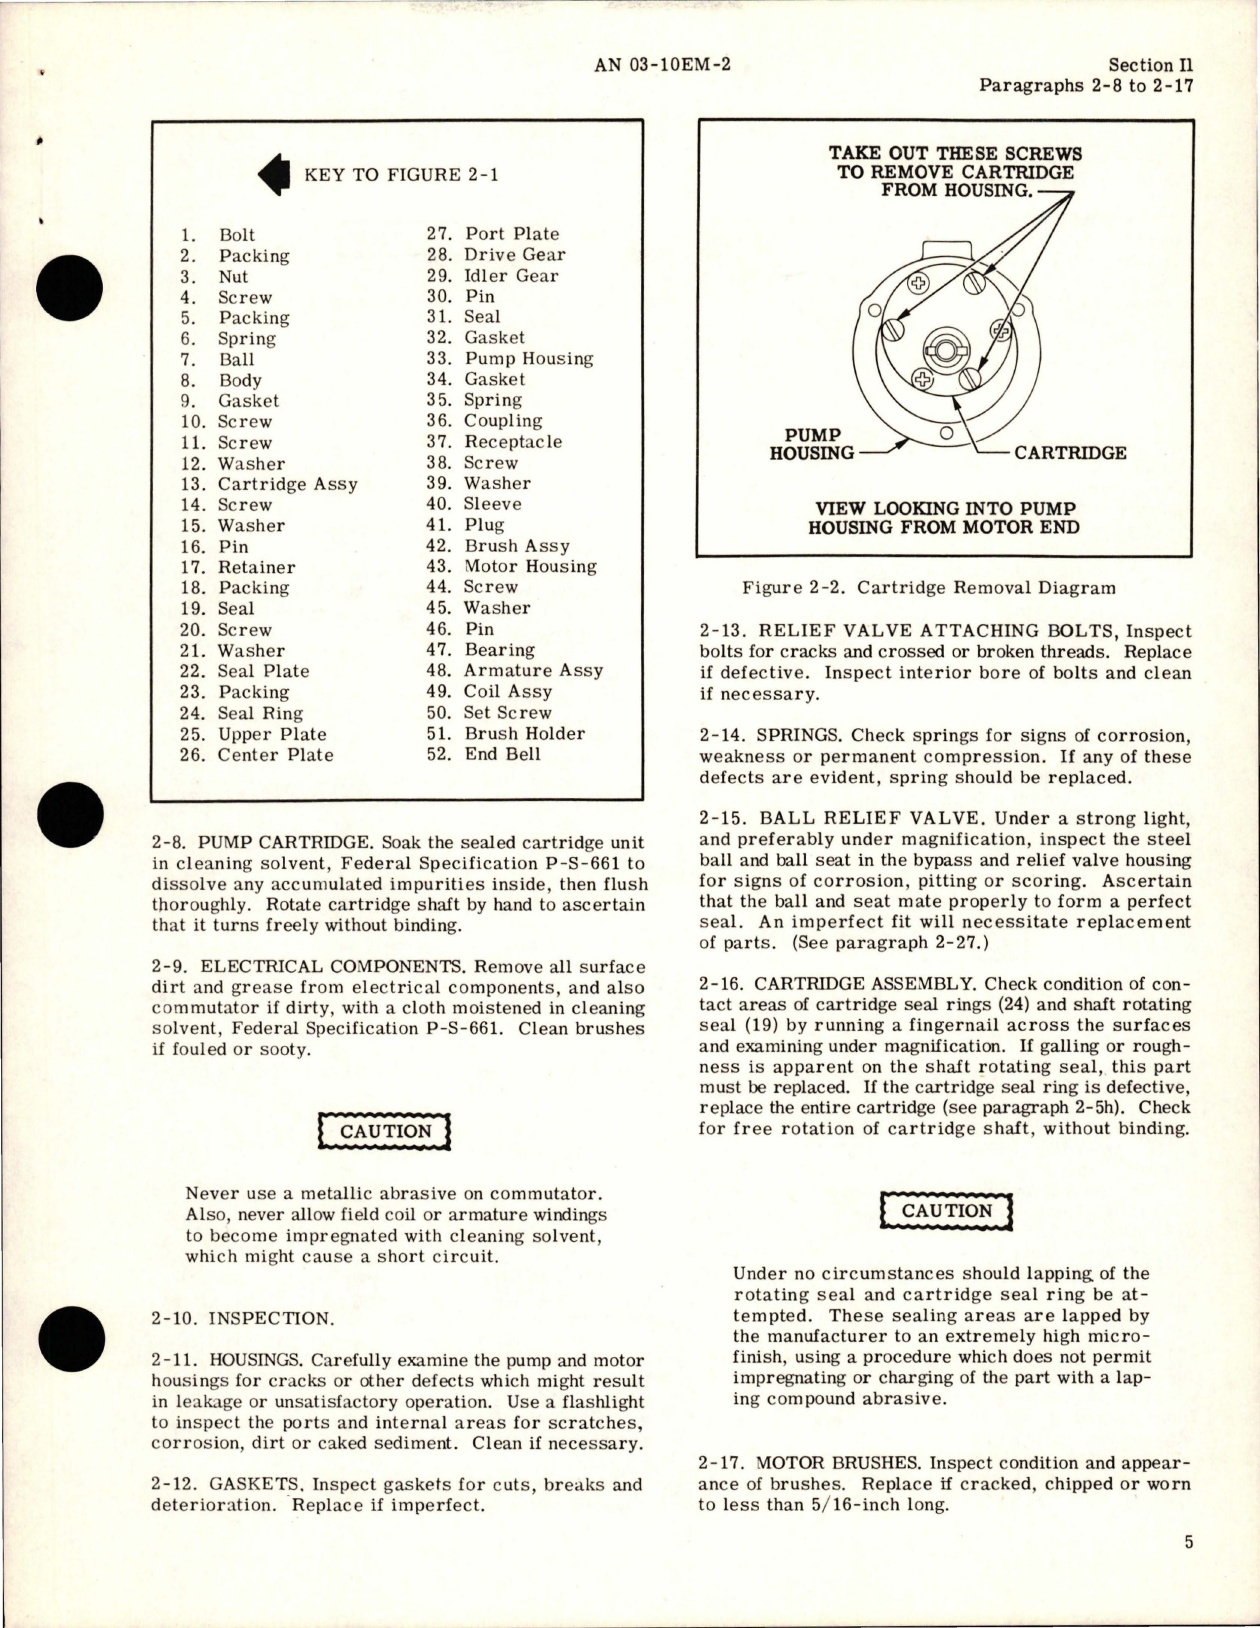 Sample page 7 from AirCorps Library document: Overhaul Instructions for Emergency Fuel Pump - Part 19902 and 20653-2 